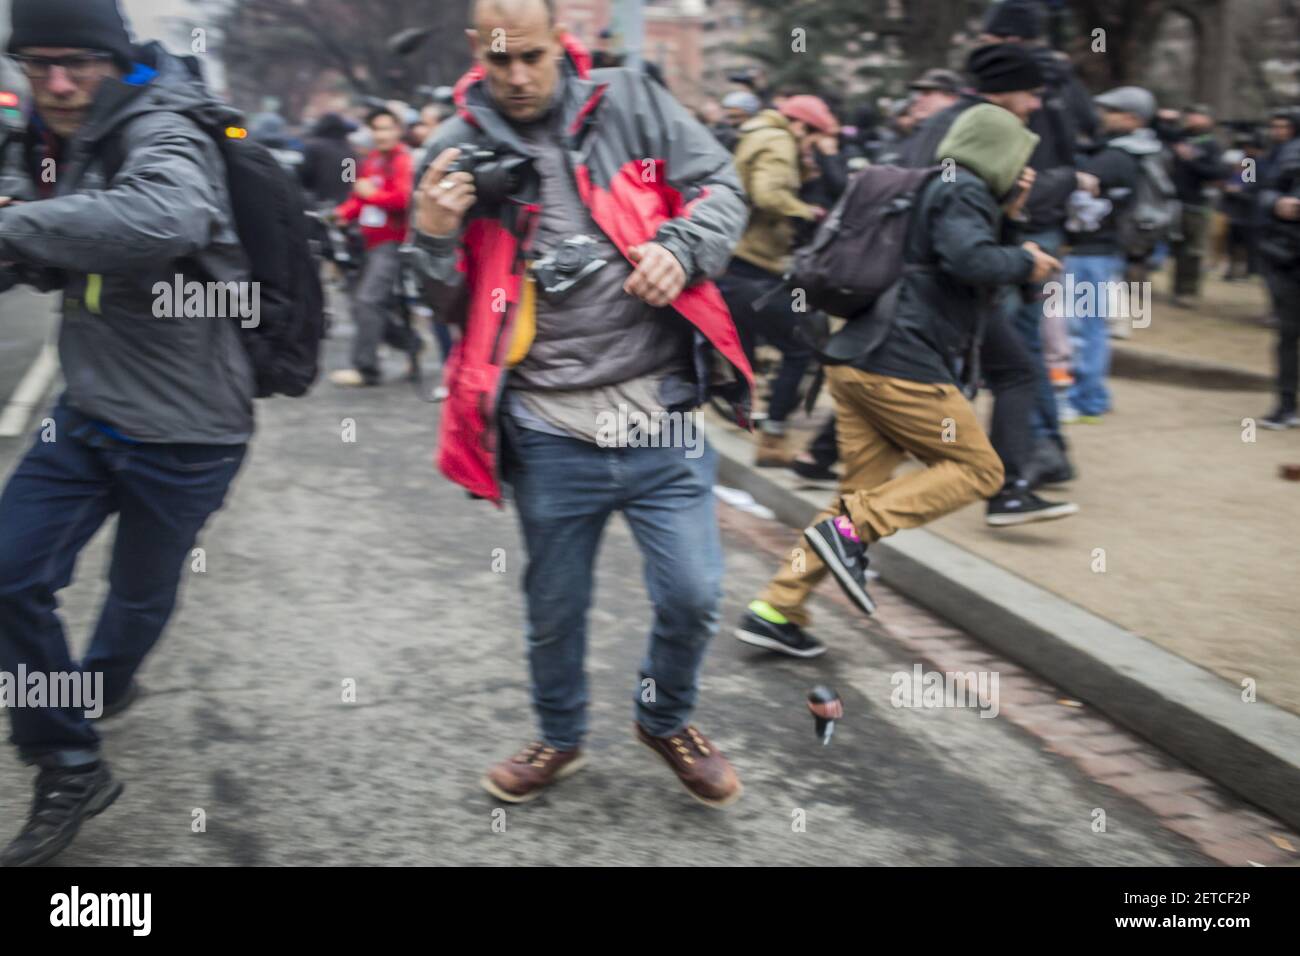 Hours after Donald Trump was swore in as the 45th President of the United States, On January, 20, 2017, ??protesters clashed with riot police, who launched flash grenades and sprayed pepper spray into ?the packed streets. (Photo by Michael Nigro) *** Please Use Credit from Credit Field *** Stock Photo